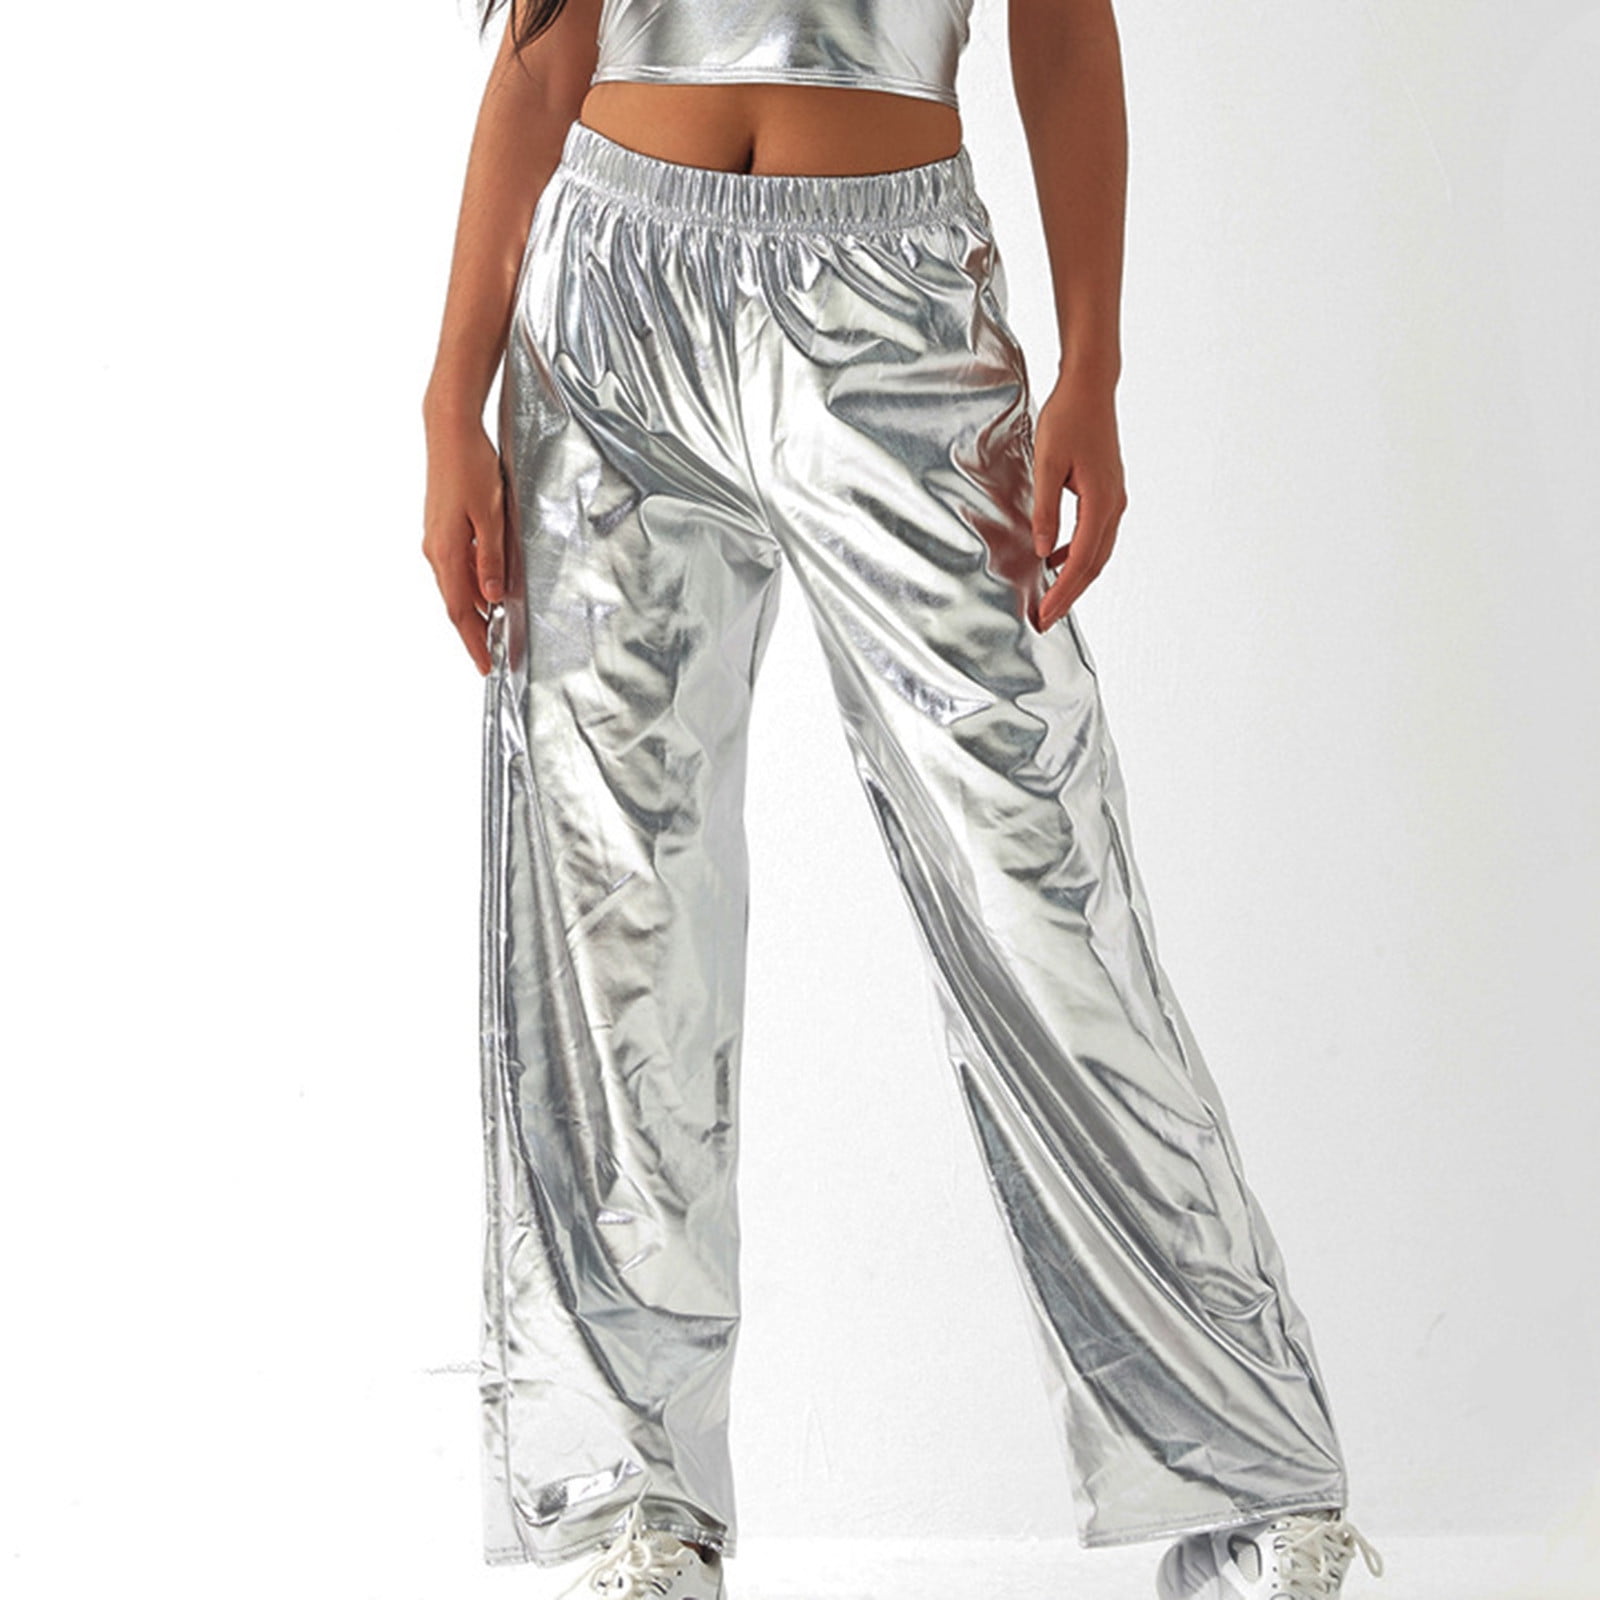 Fenyong Womens Shiny Metallic Pants, Holographic Disco Sweatpant for 70s  80s Alien Space Cowgirl Halloween Costume, Silver, S price in Dubai, UAE |  Compare Prices